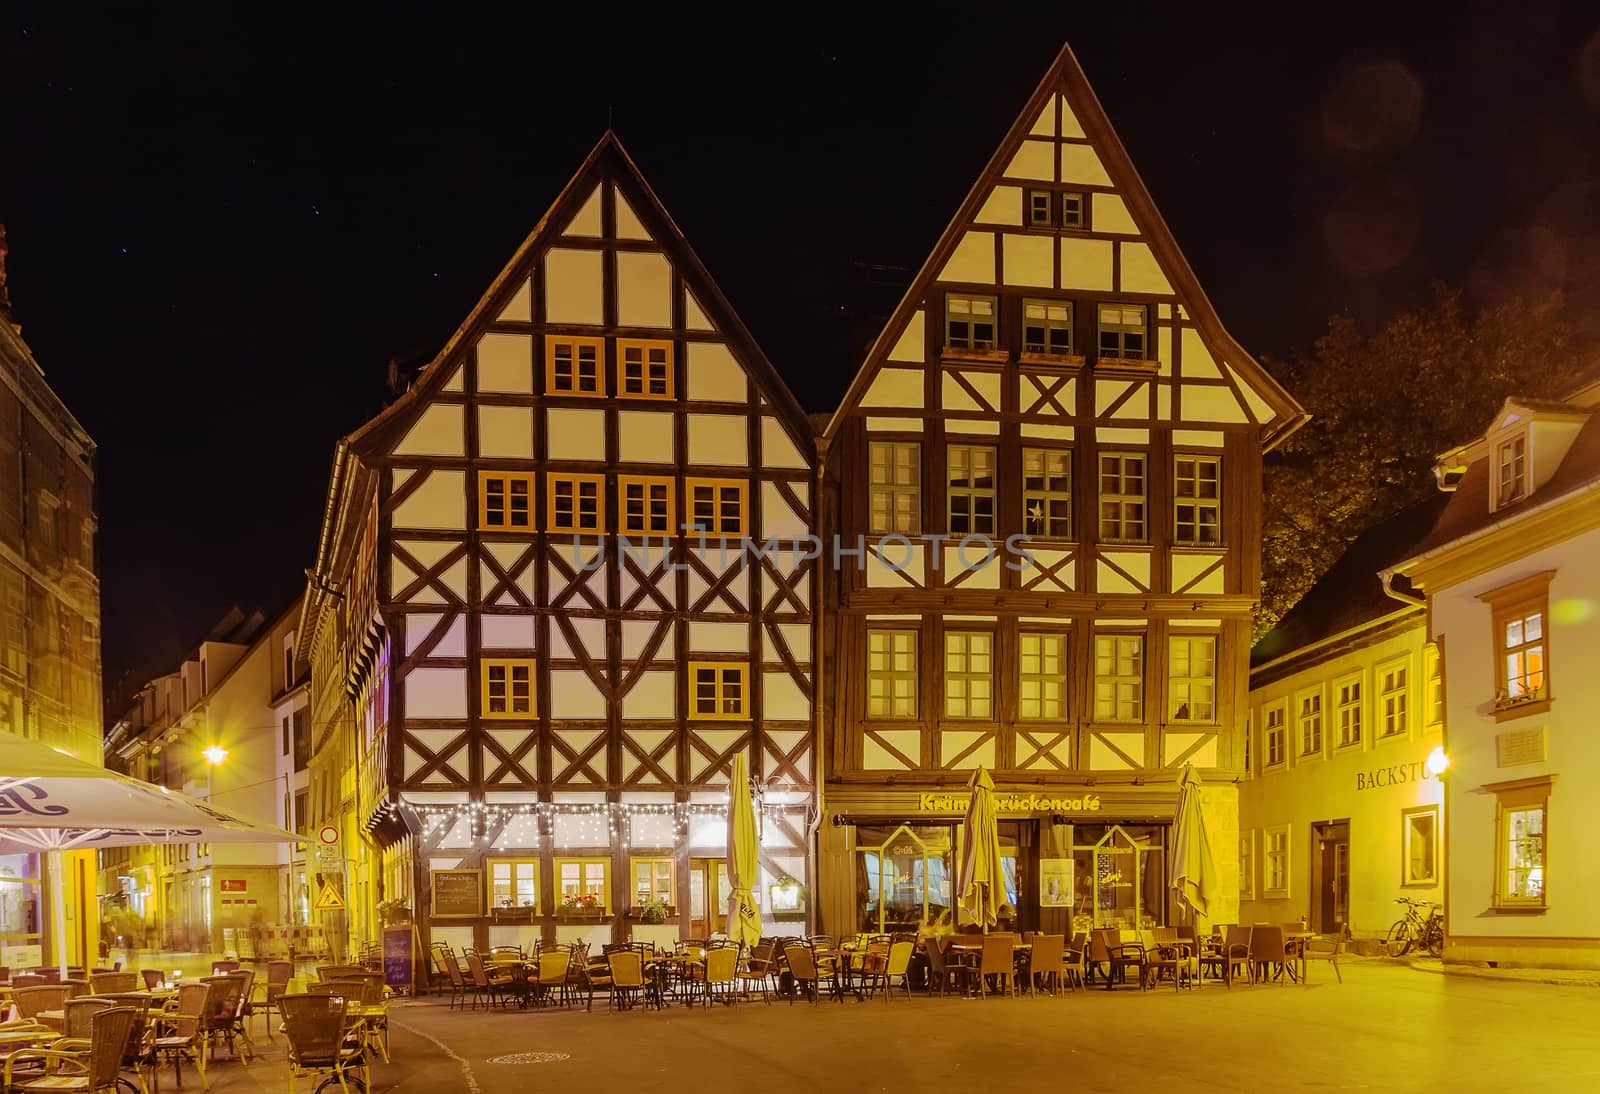 Houses in half-timbering style in Erfurt in the evening